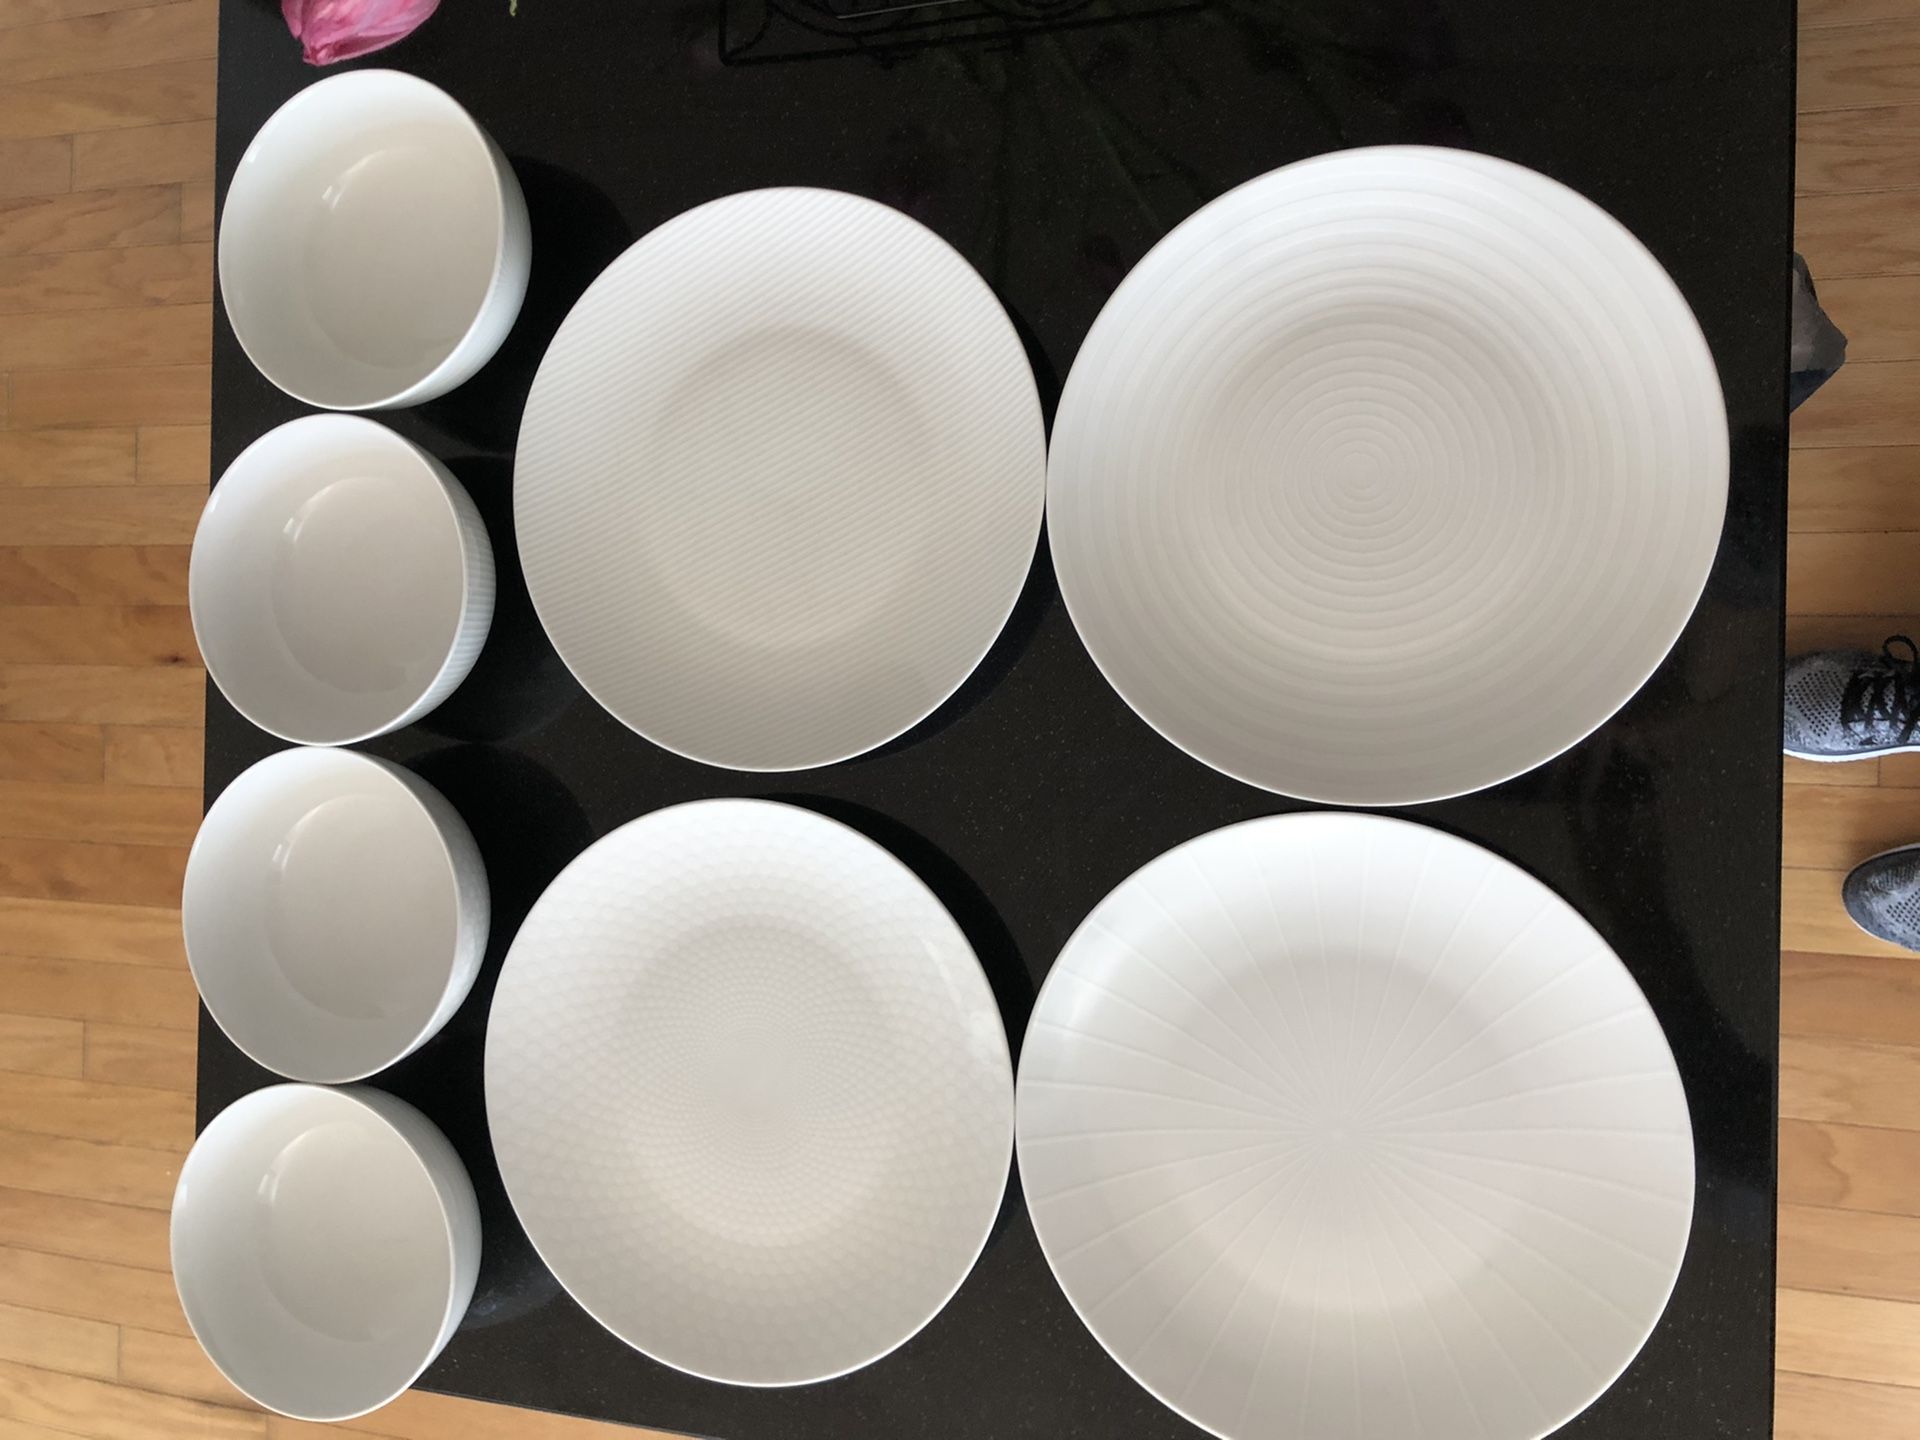 Set of dinner plates and bowls